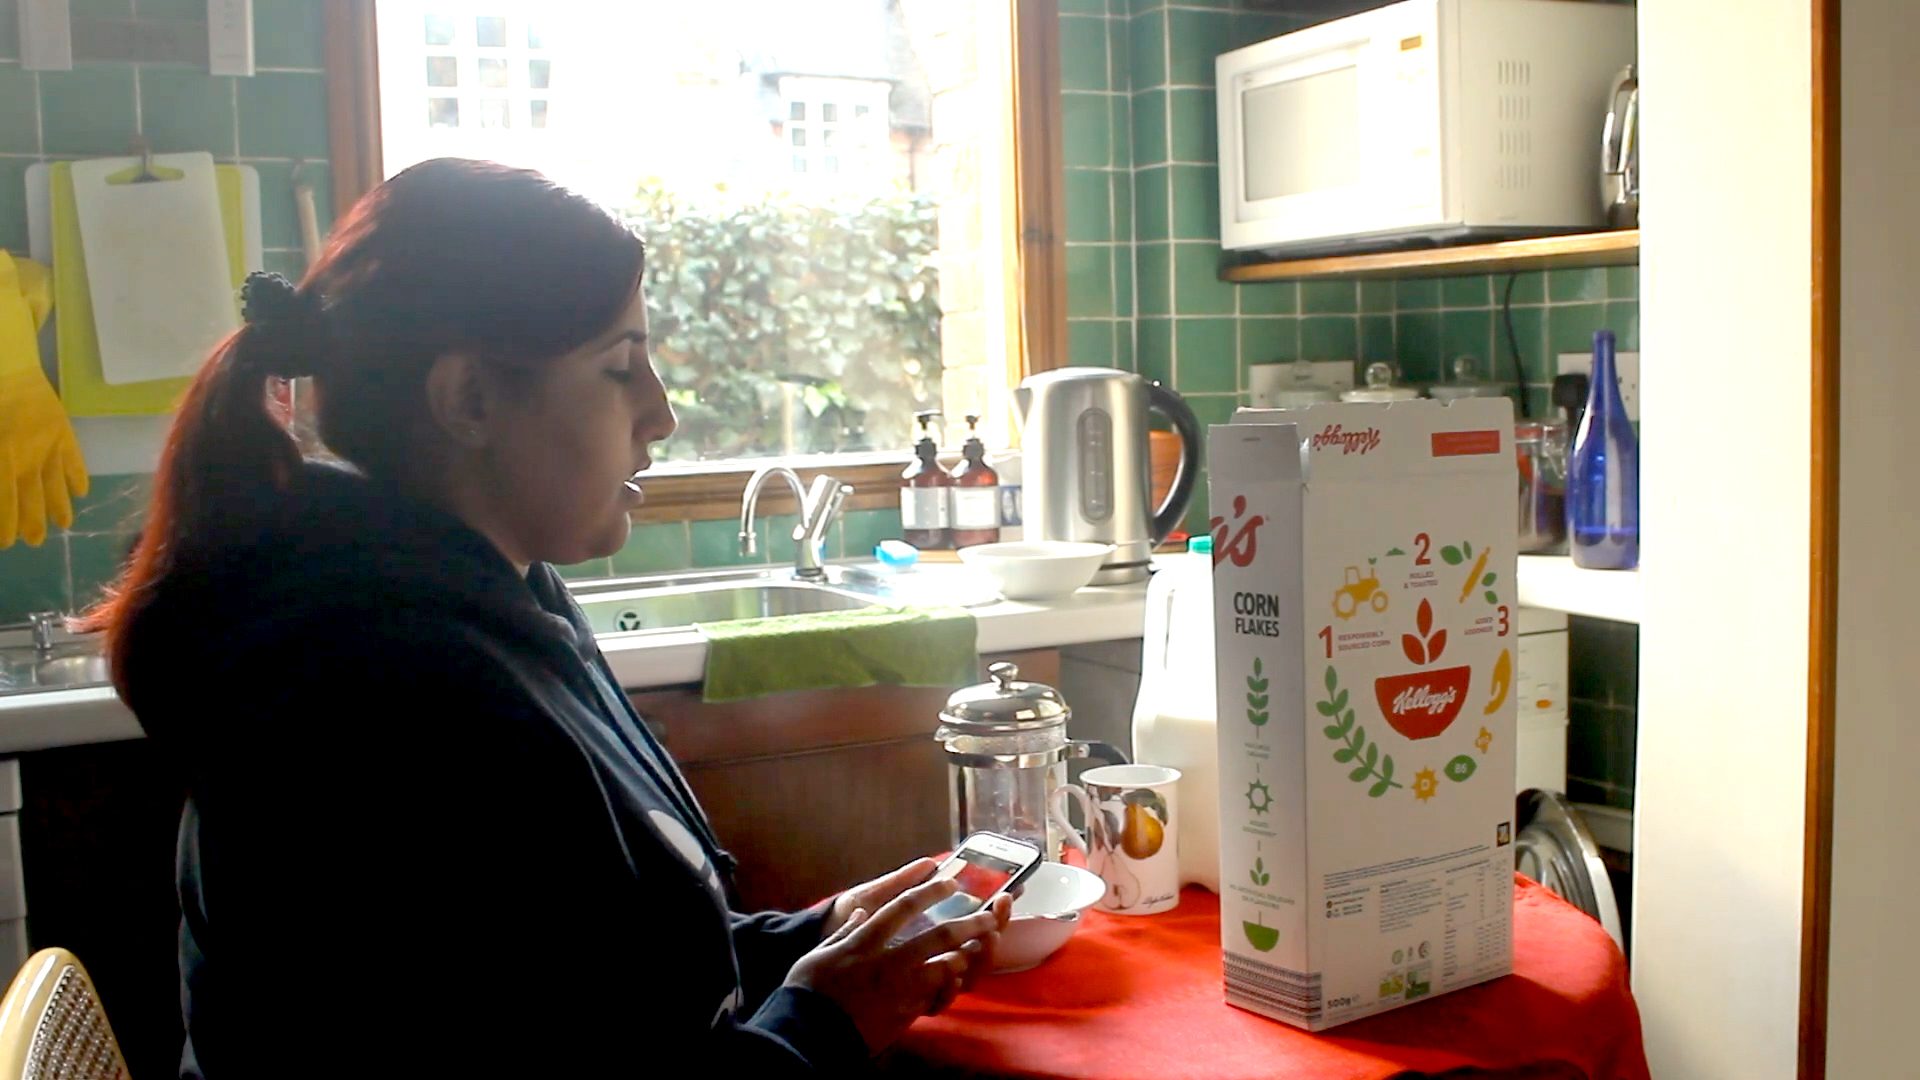 A woman in her kitchen using a mobile phone to scan a barcode to find out what the product in from of her is; which is cornflakes